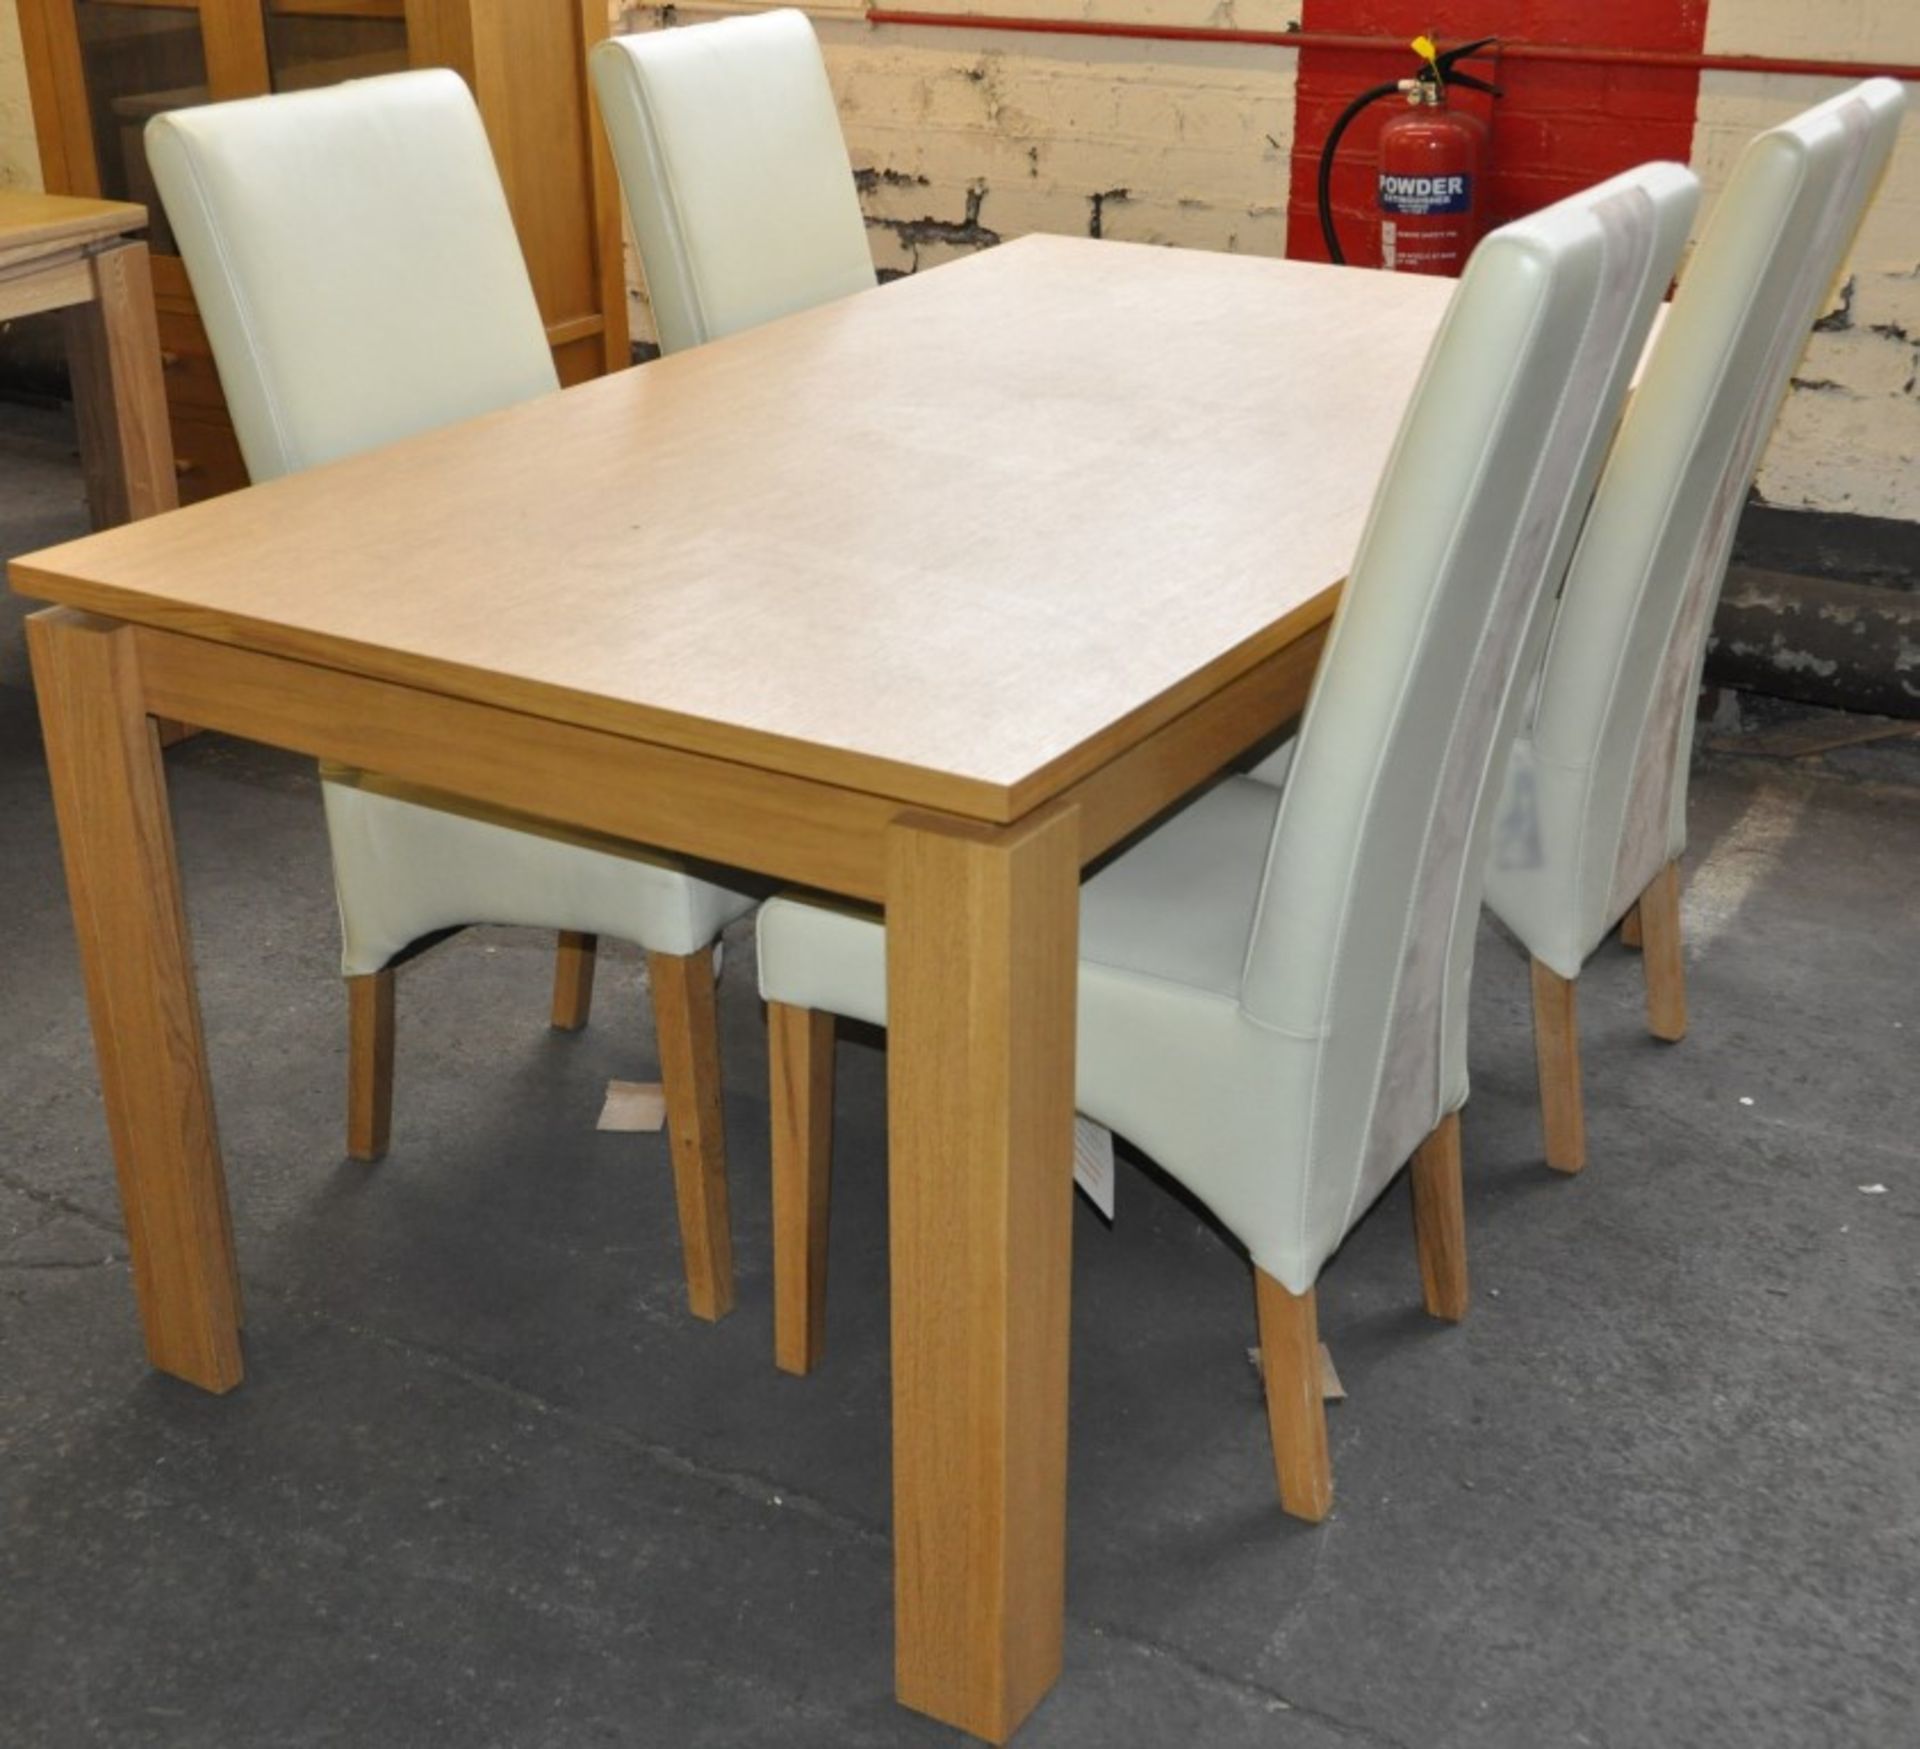 1 x Natural Oak Fixed Top Dining Table Set with 4 Luxurious Matching Chairs – Good Condition – Ex